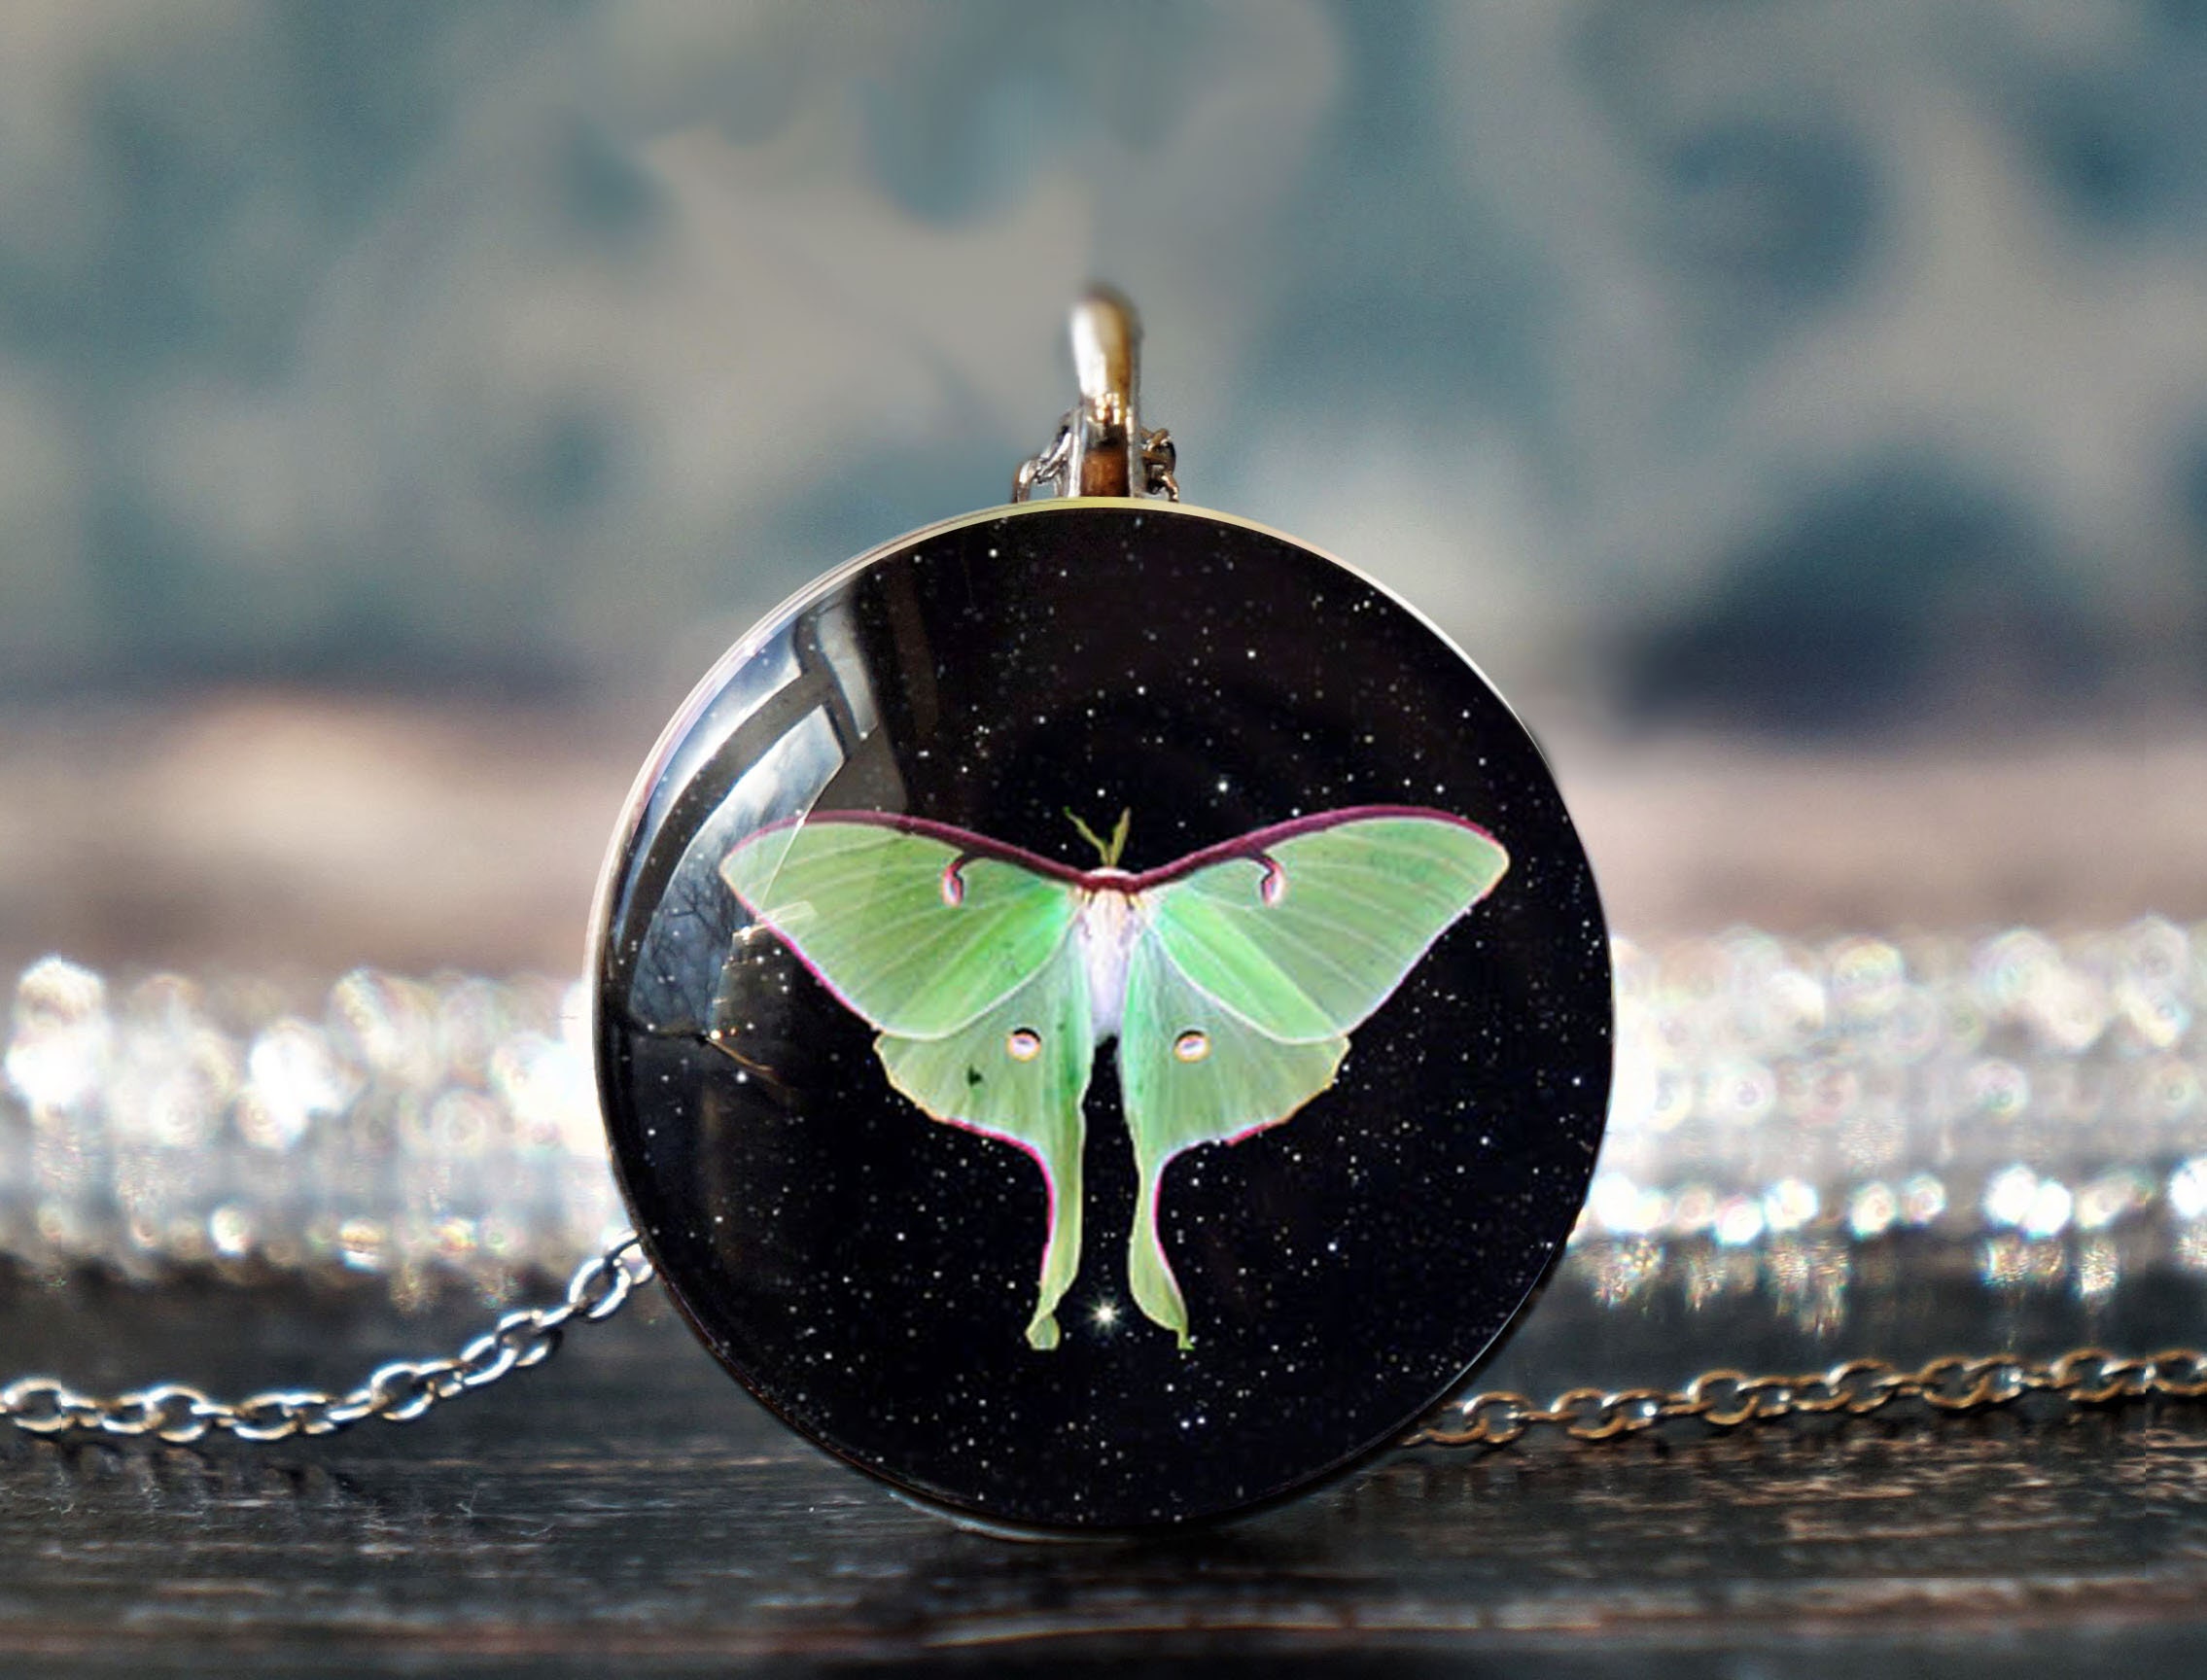 1pcs/4pcs Gold Luna Moth Pendant Metal Charms Insect Charm Witchy Charms  Wicca Pagan Pendant 